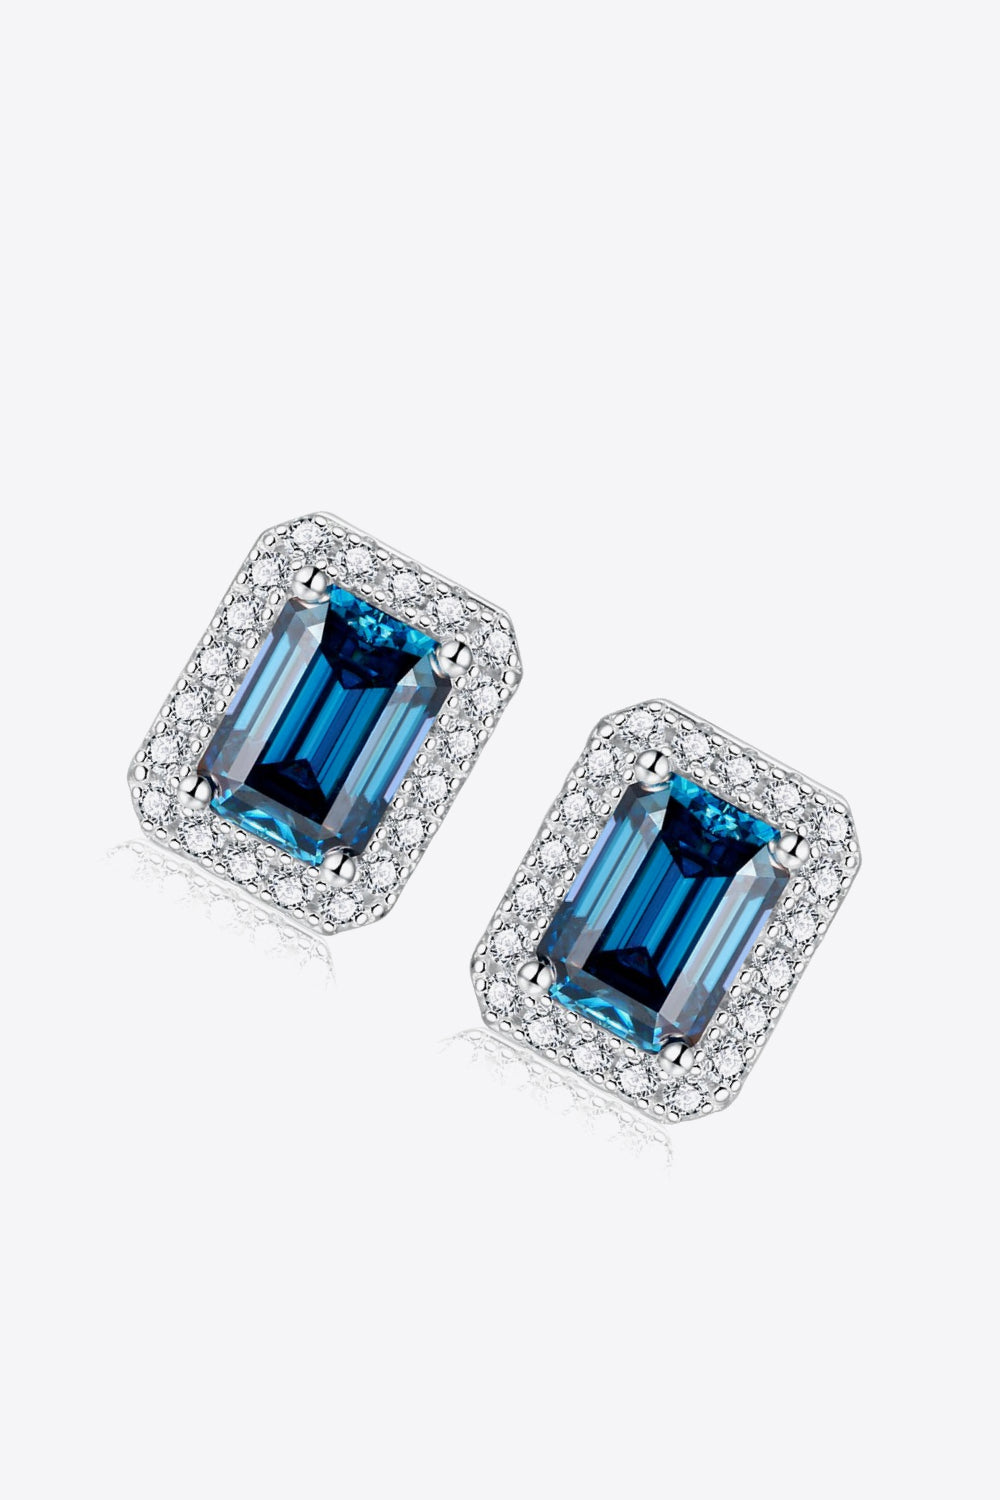 2 Carat Moissanite Stud Earrings in Indigo-Earrings-Inspired by Justeen-Women's Clothing Boutique in Chicago, Illinois